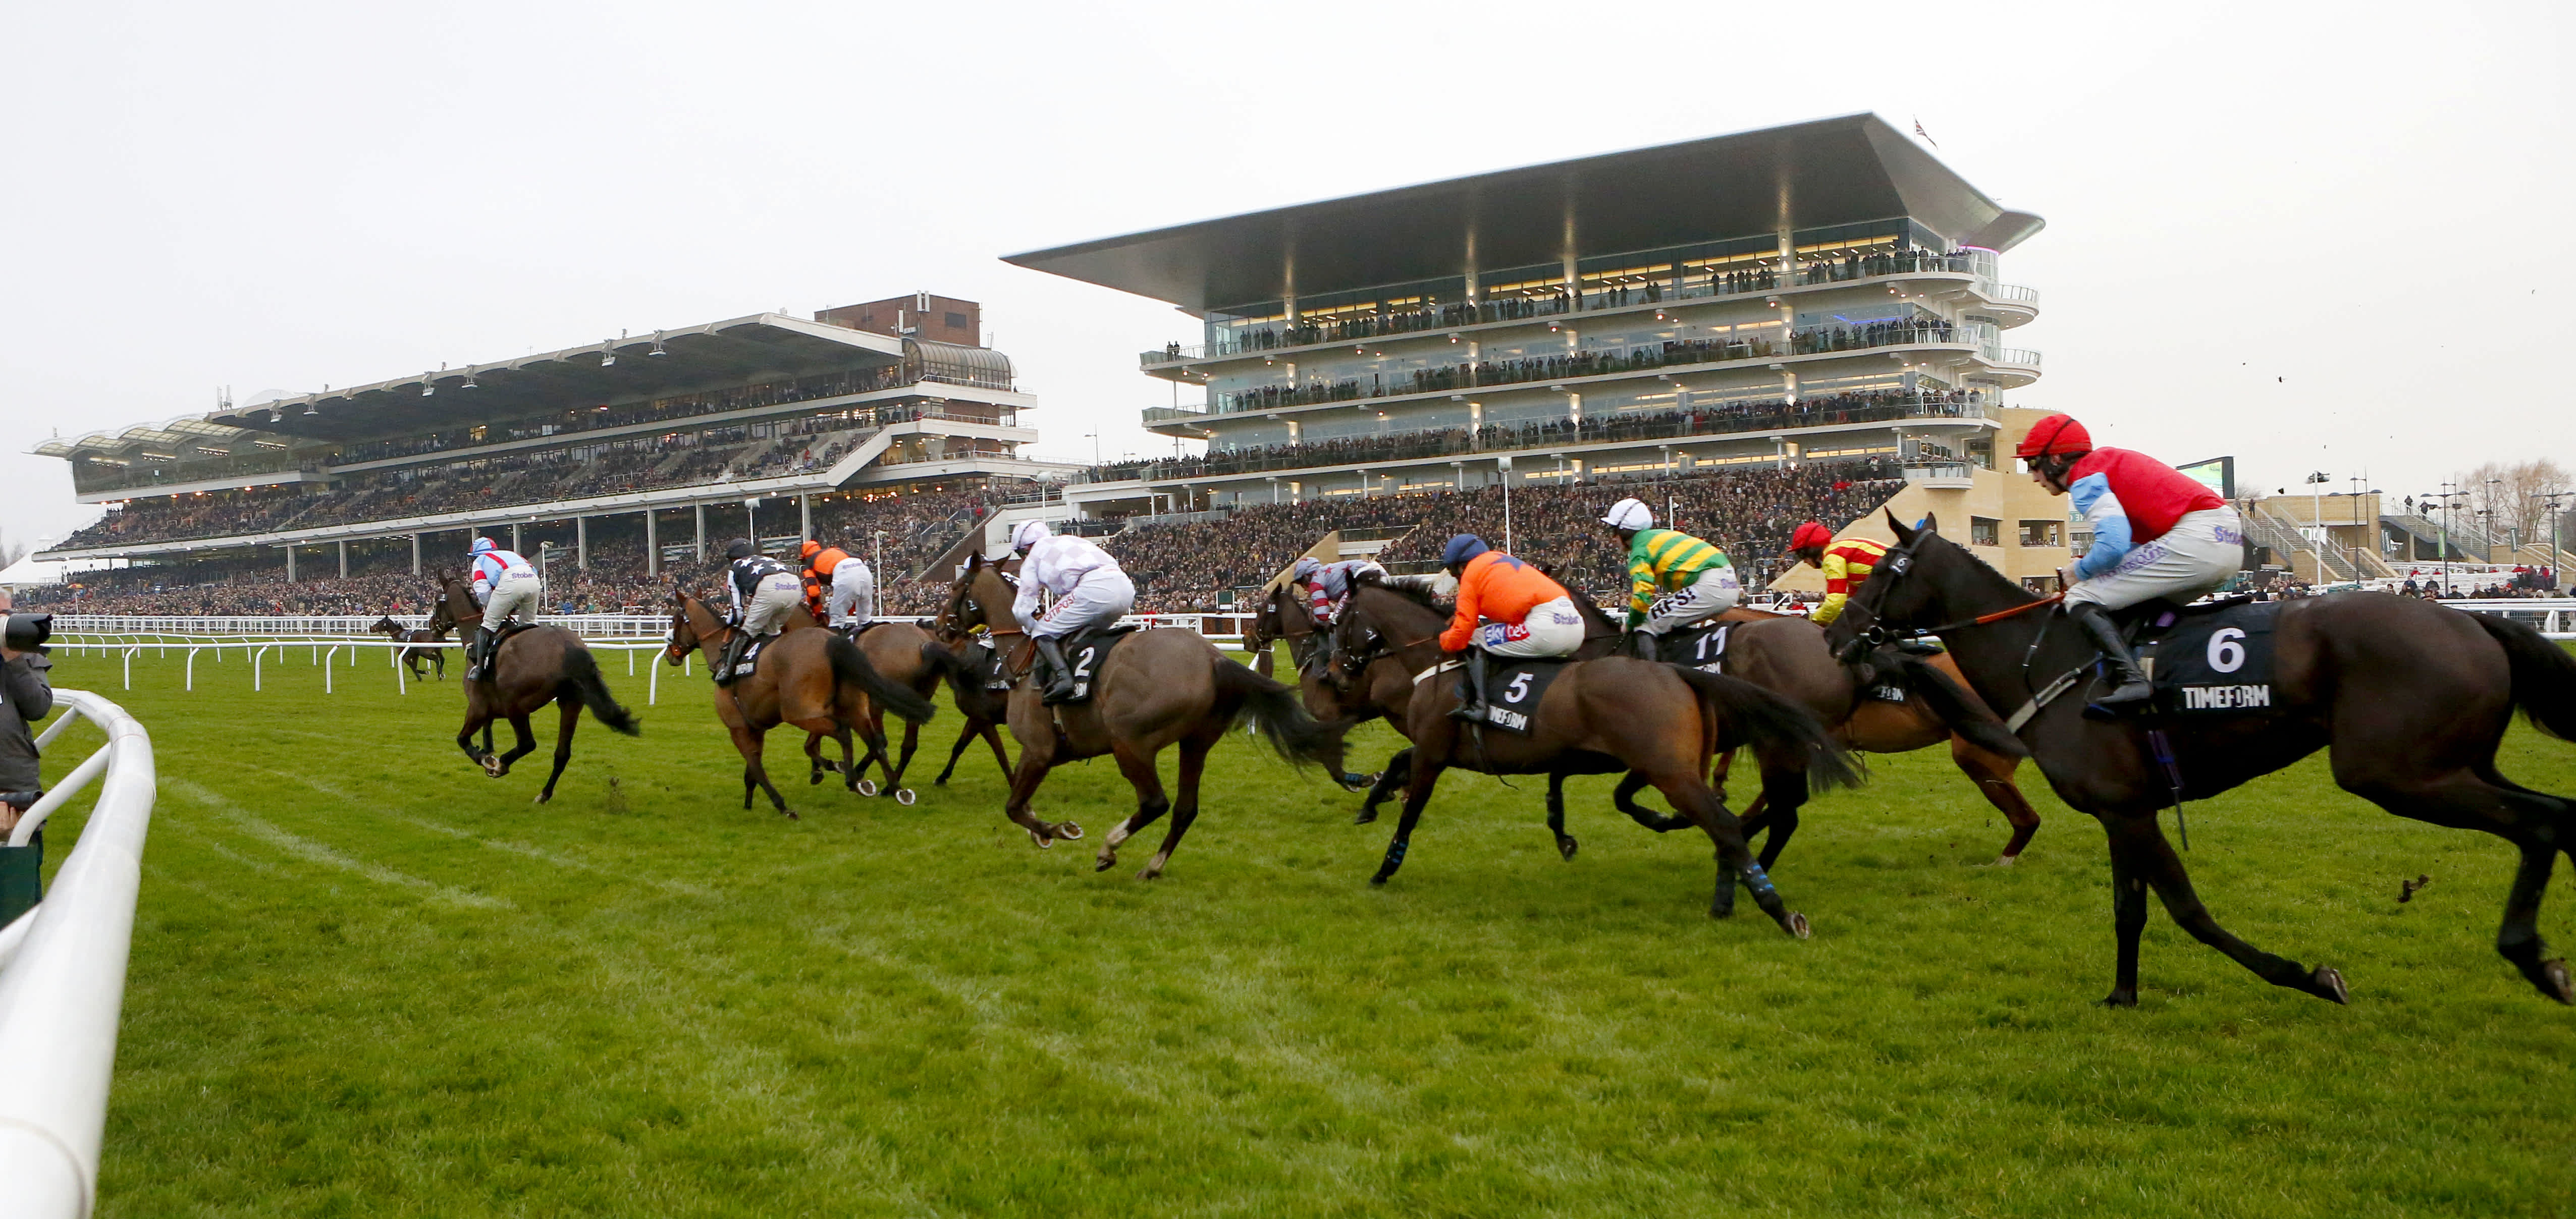 Dave Nevison My horse racing tips for day one at Cheltenham